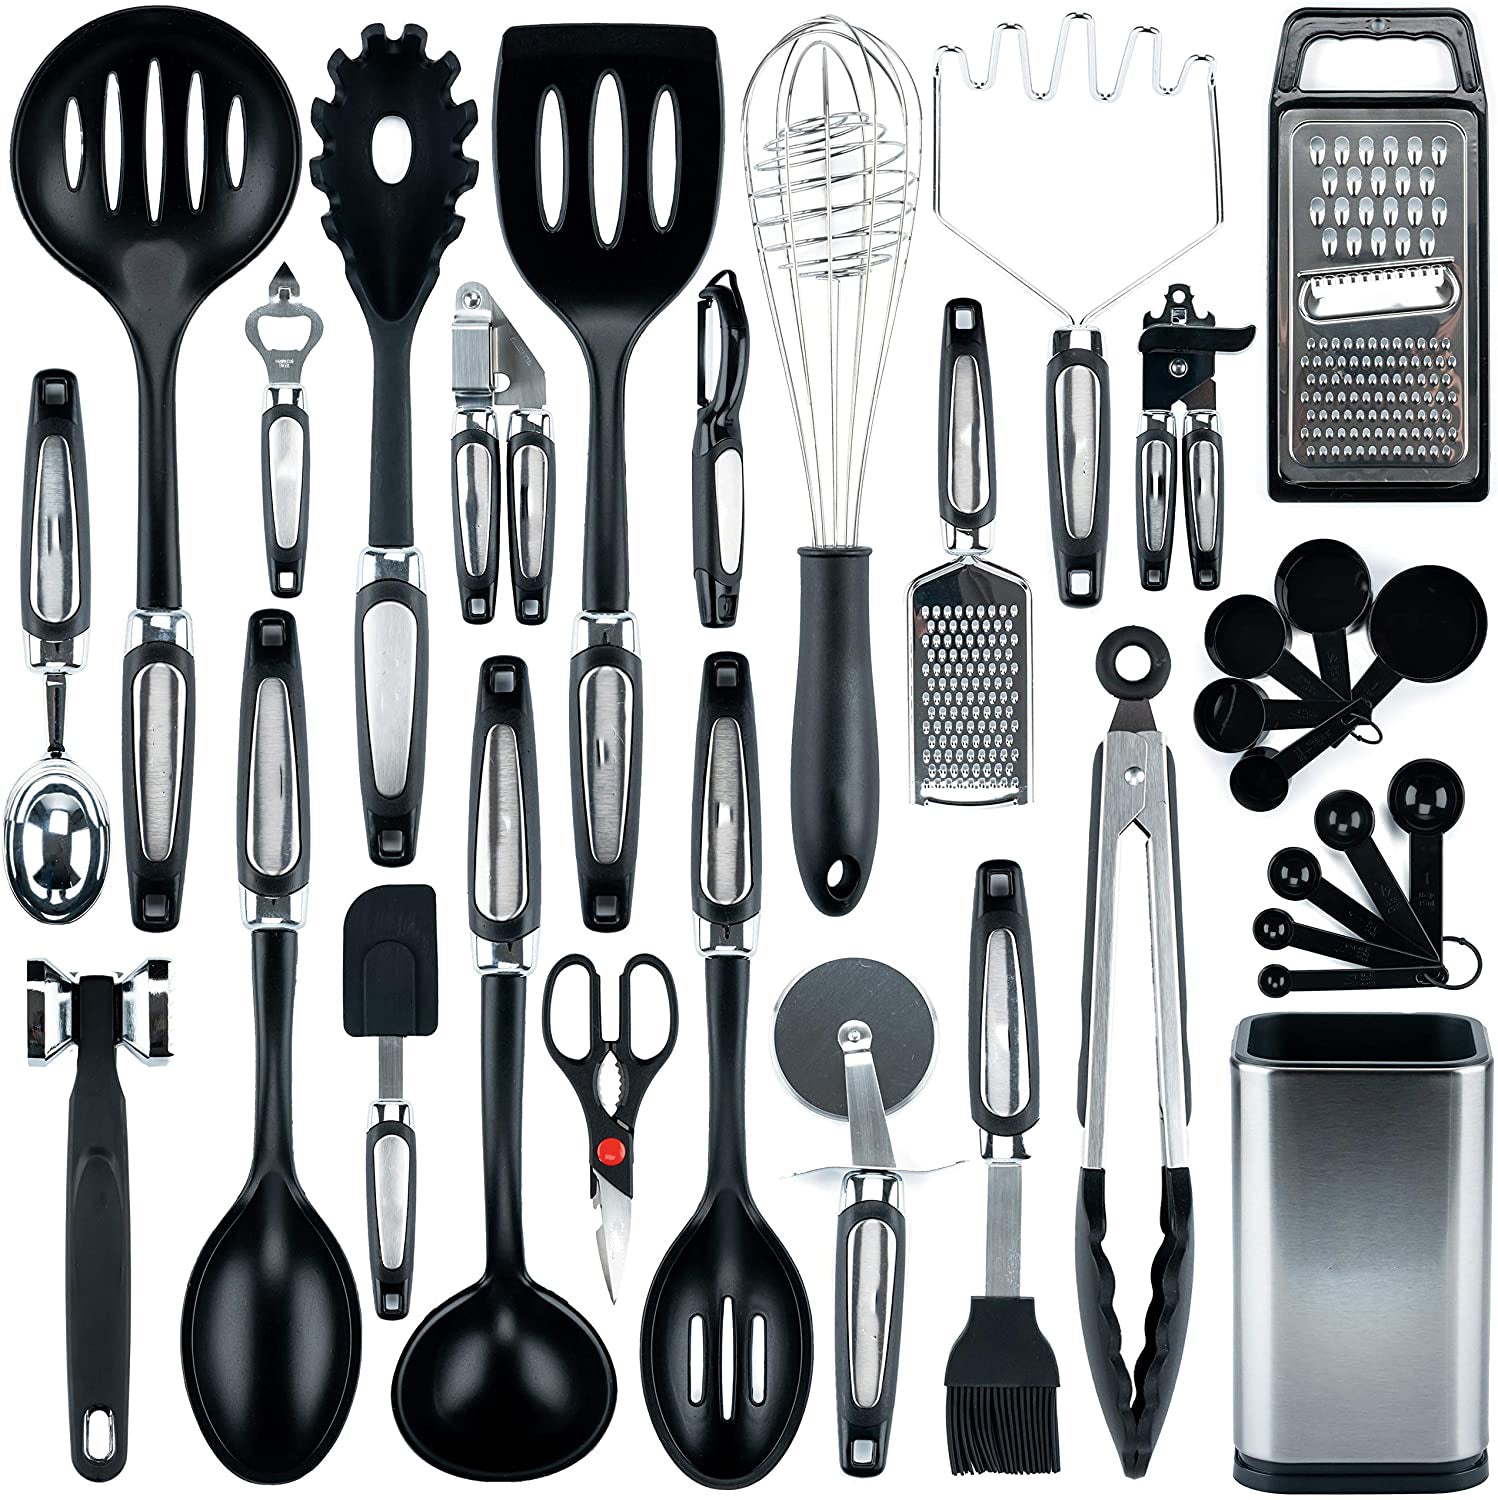 Silicone Cooking Utensils Set, 28PCS Kitchen Utensils Set with Holder,  AIKWI Heat-Resistant & Non-stick Silicone Spatula, Tongs,Spoon for Cooking,  BPA Free Kitchen Tools Gift (Gray) : Amazon.in: Toys & Games